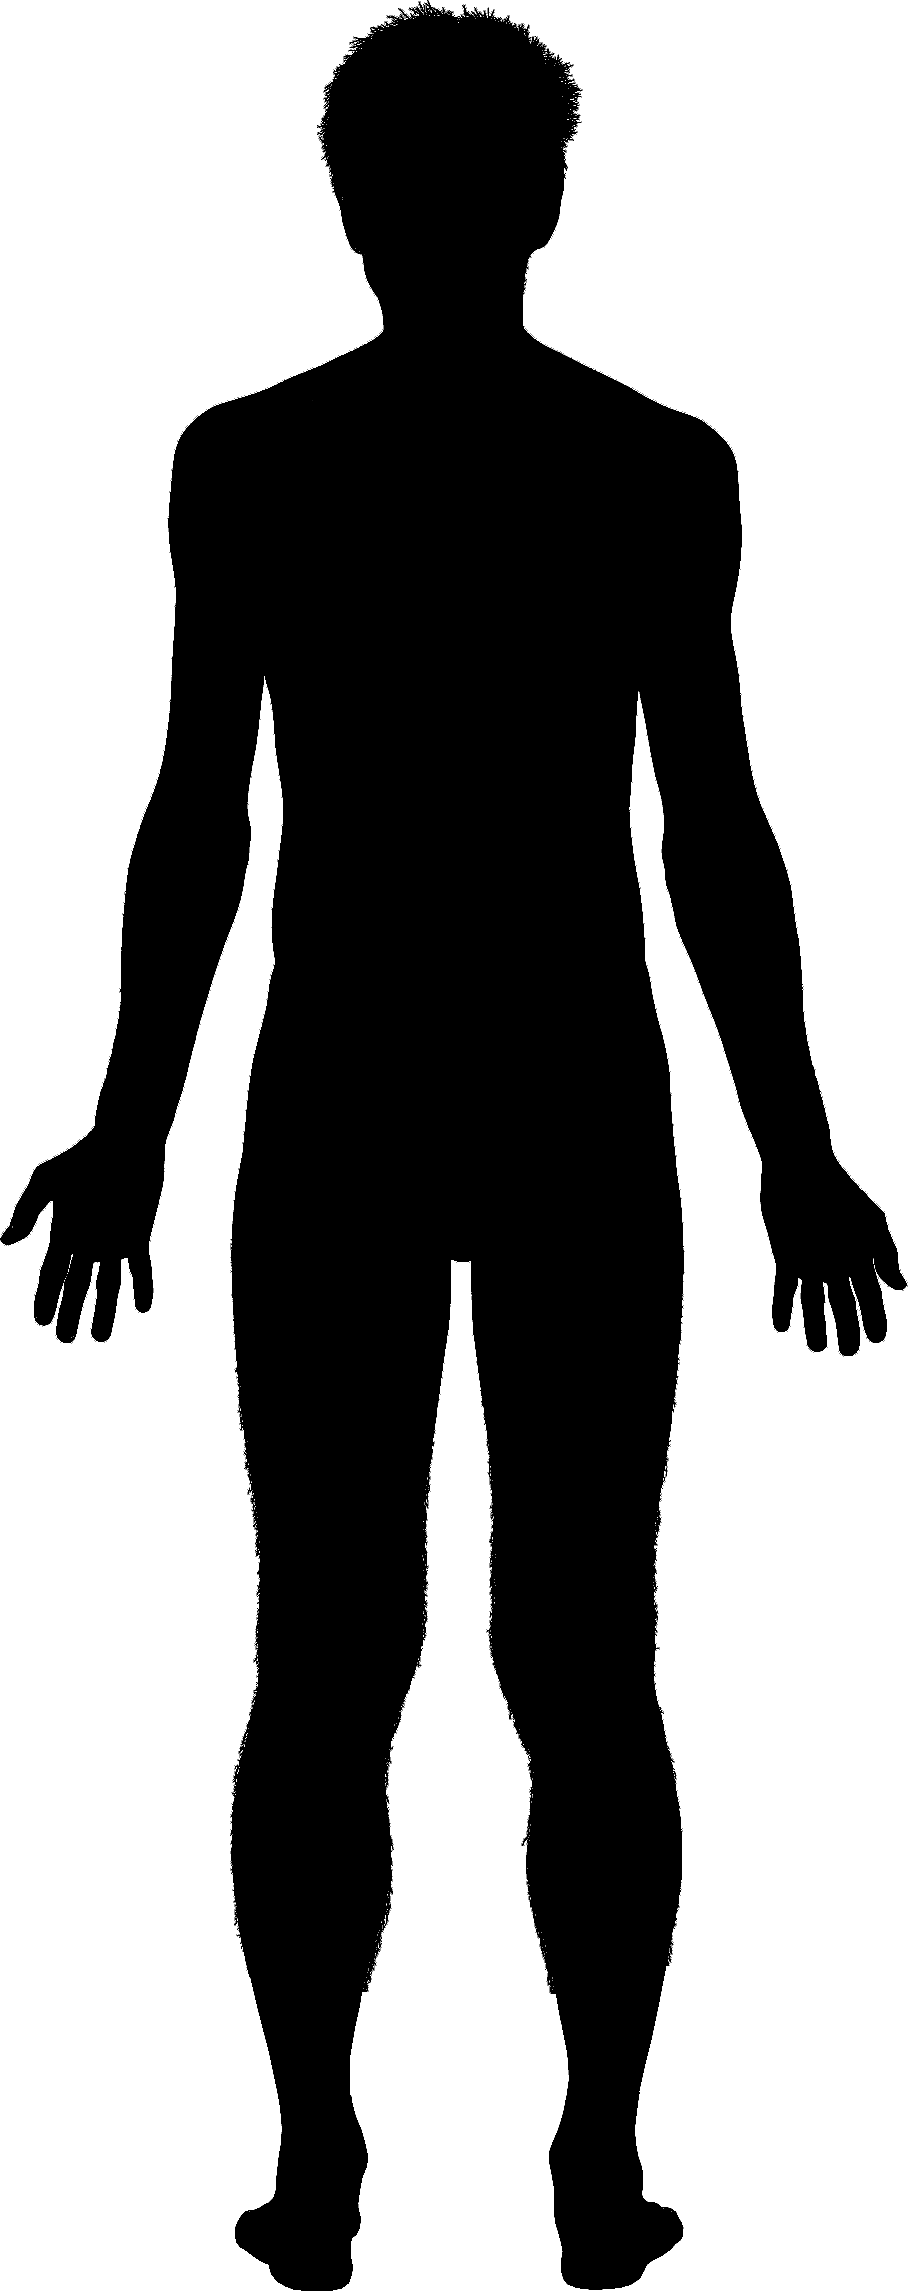 Png Human Body Outline - Medical, Transparent background PNG HD thumbnail